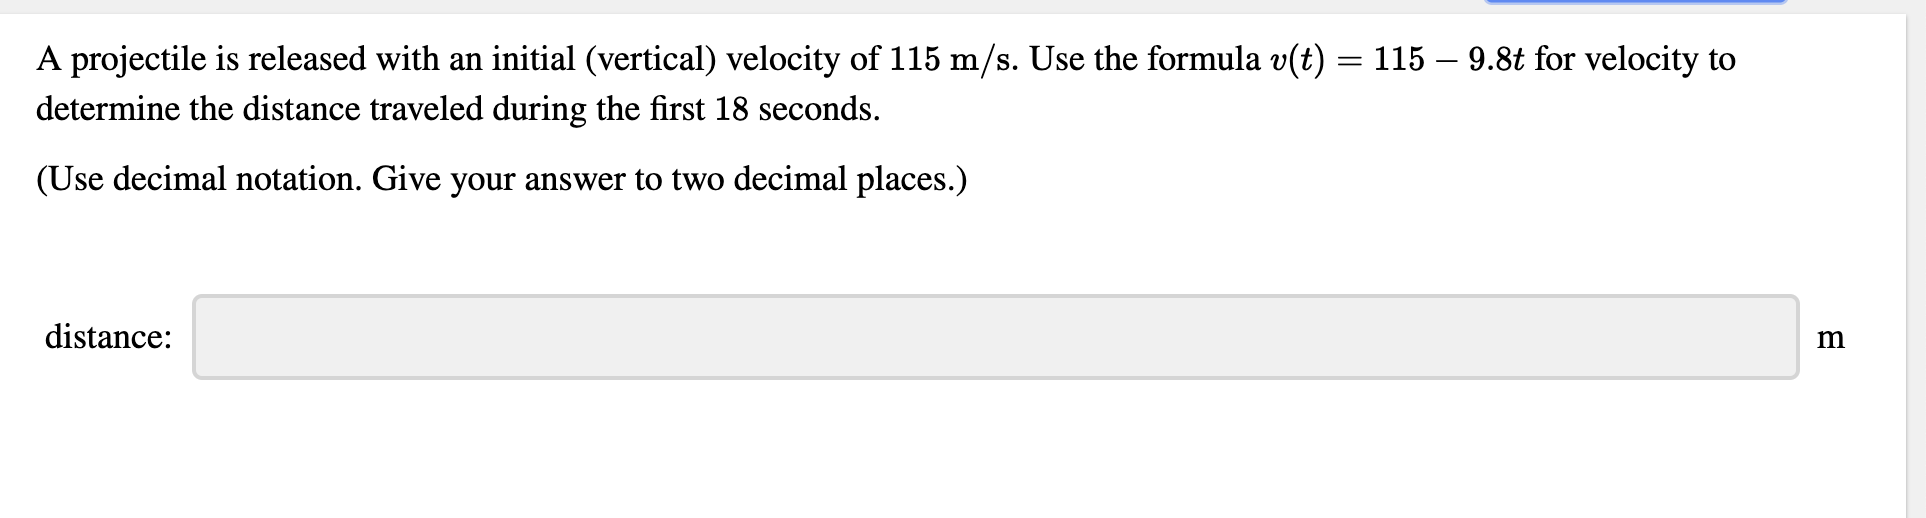 A projectile is released with an initial (vertical) velocity of 115 m/s. Use the formula v(t) = 115 – 9.8t for velocity to
determine the distance traveled during the first 18 seconds.
(Use decimal notation. Give your answer to two decimal places.)
distance:
